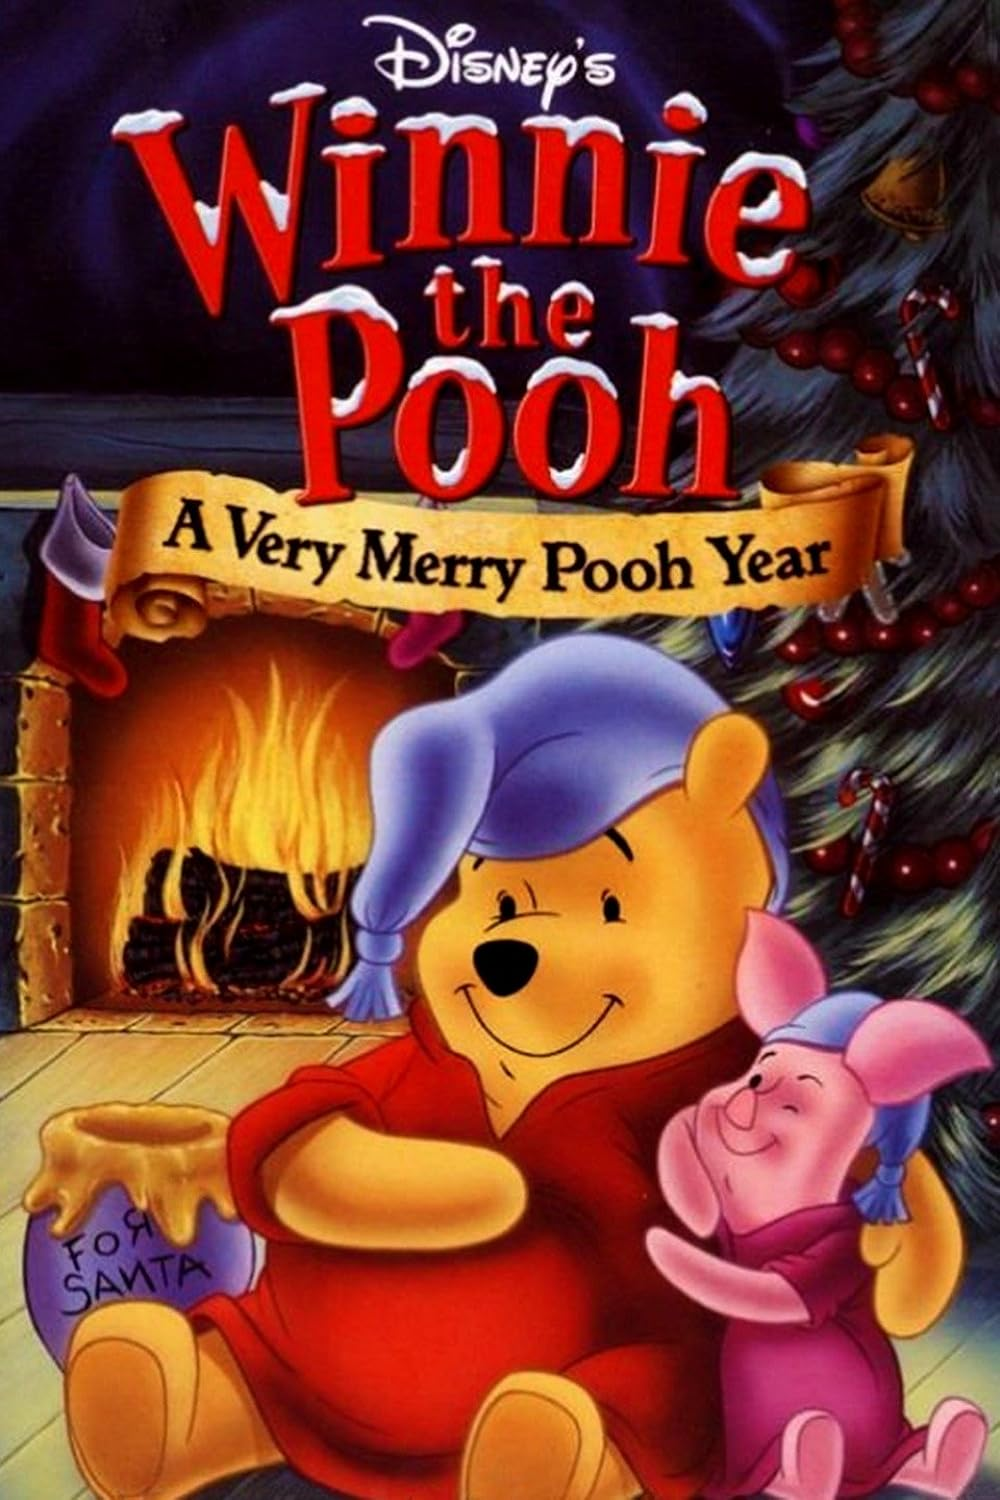 Best Christmas animated movies - Winnie the Pooh: A Very Merry Pooh Year